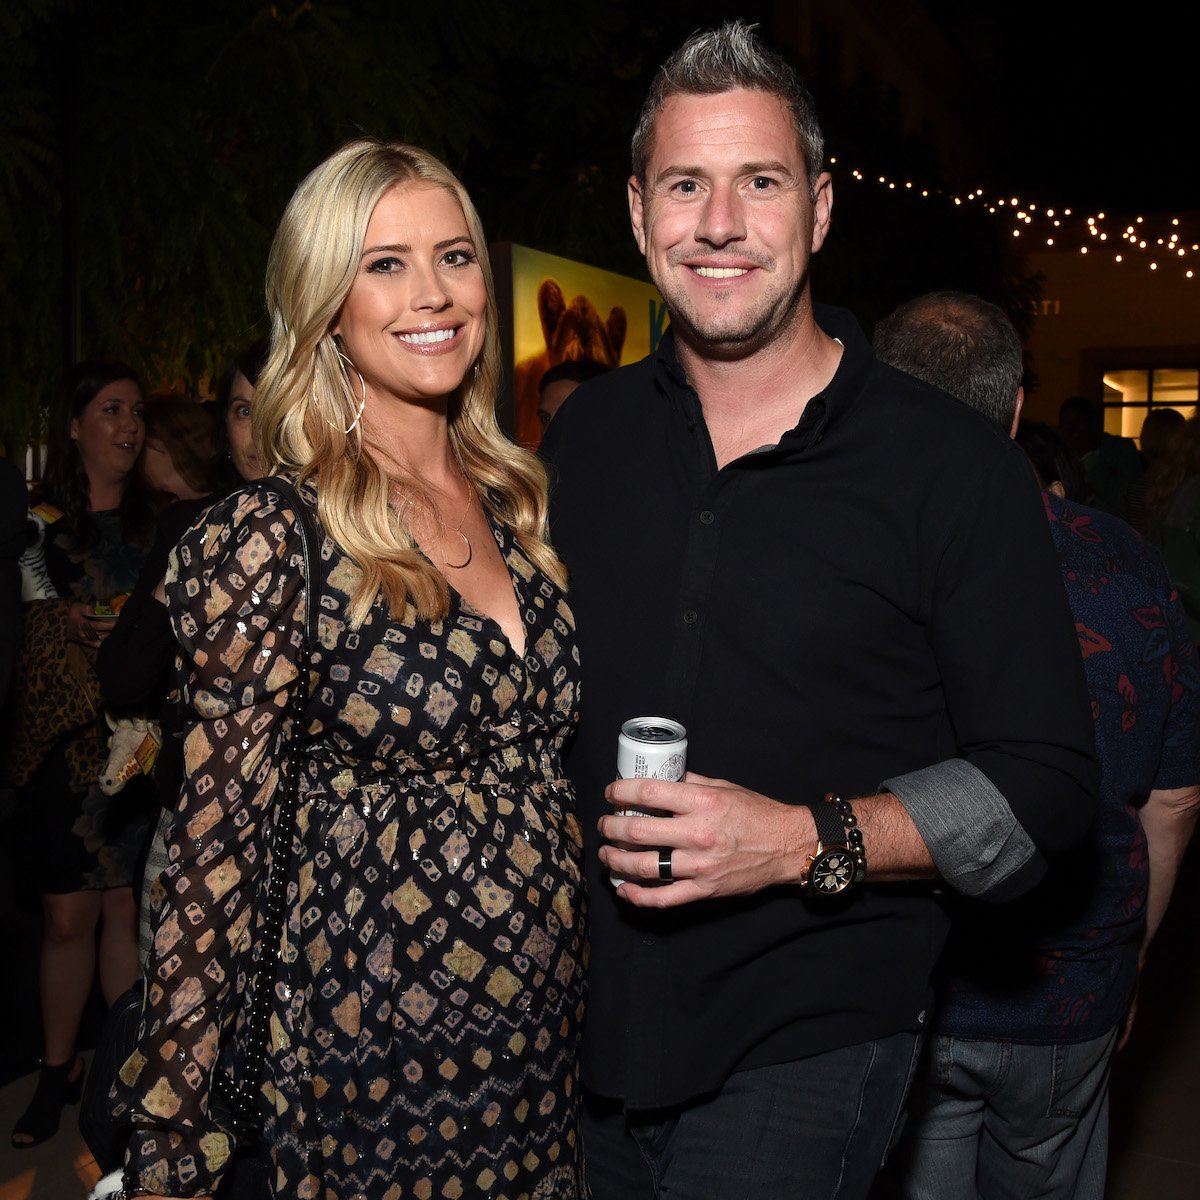 Christina Haack and Ant Anstead pose together at an event.